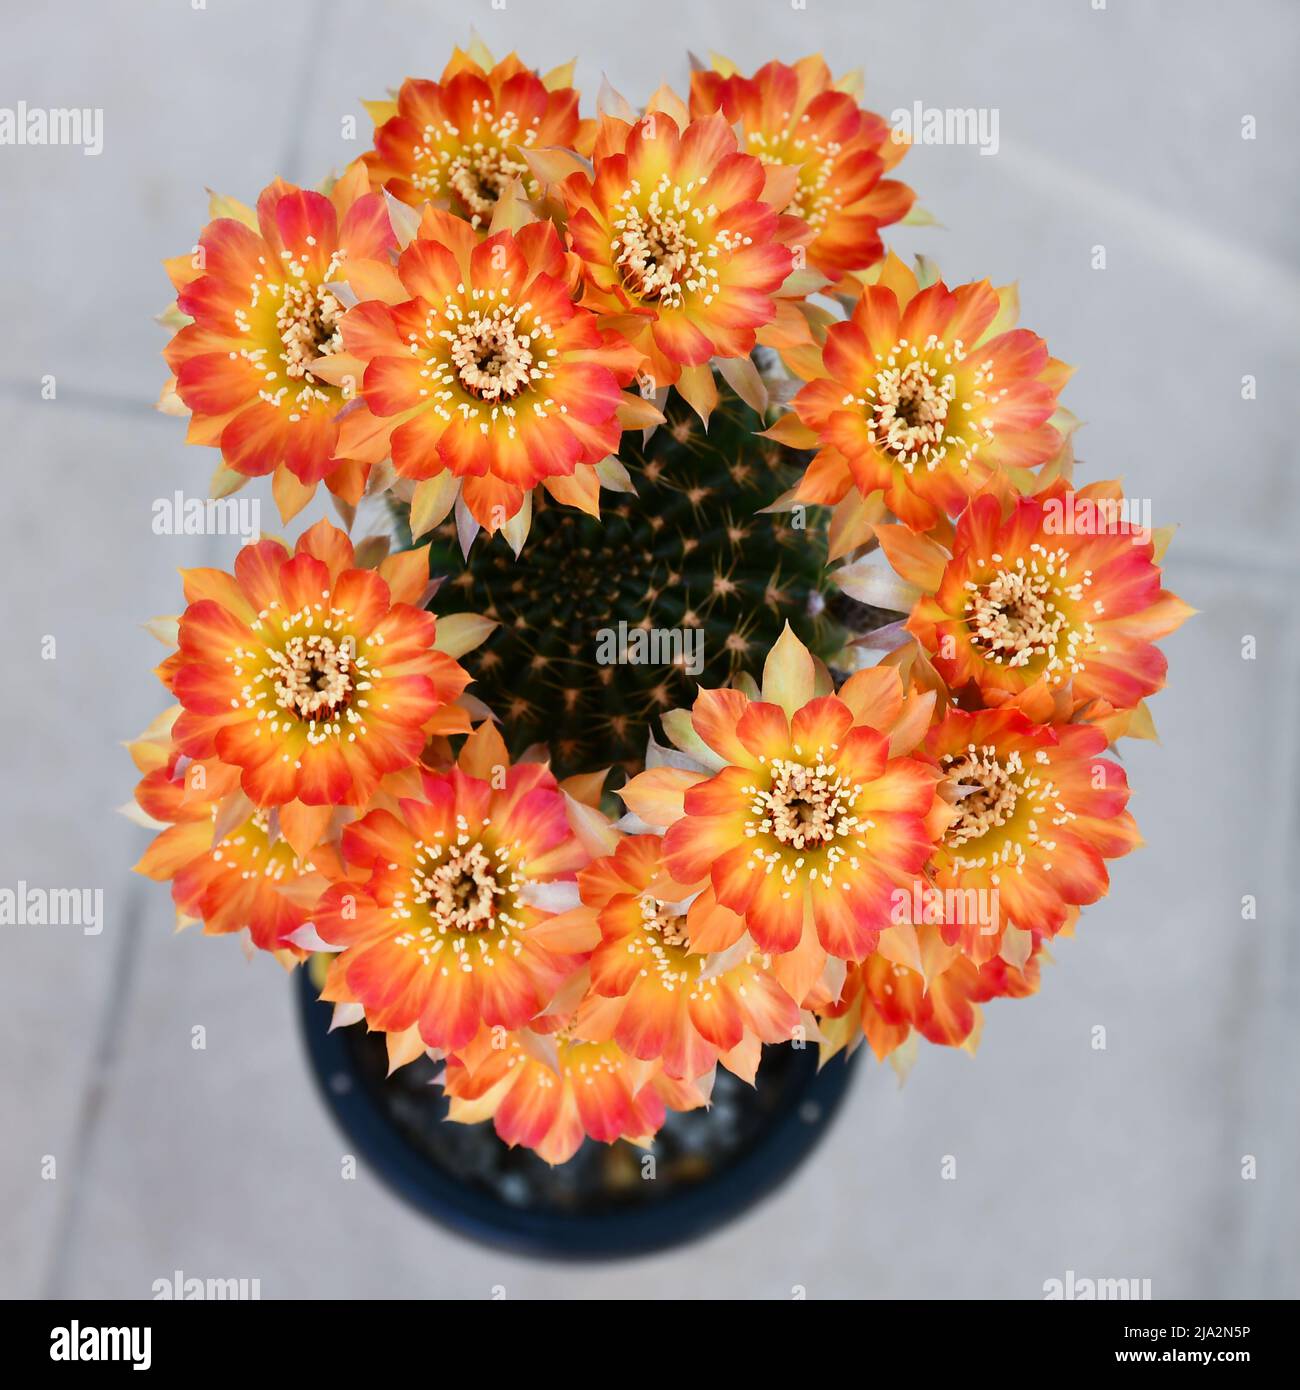 Orange and yellow flowers of Lobivia hybrid in closed-up as flowers background. Stock Photo